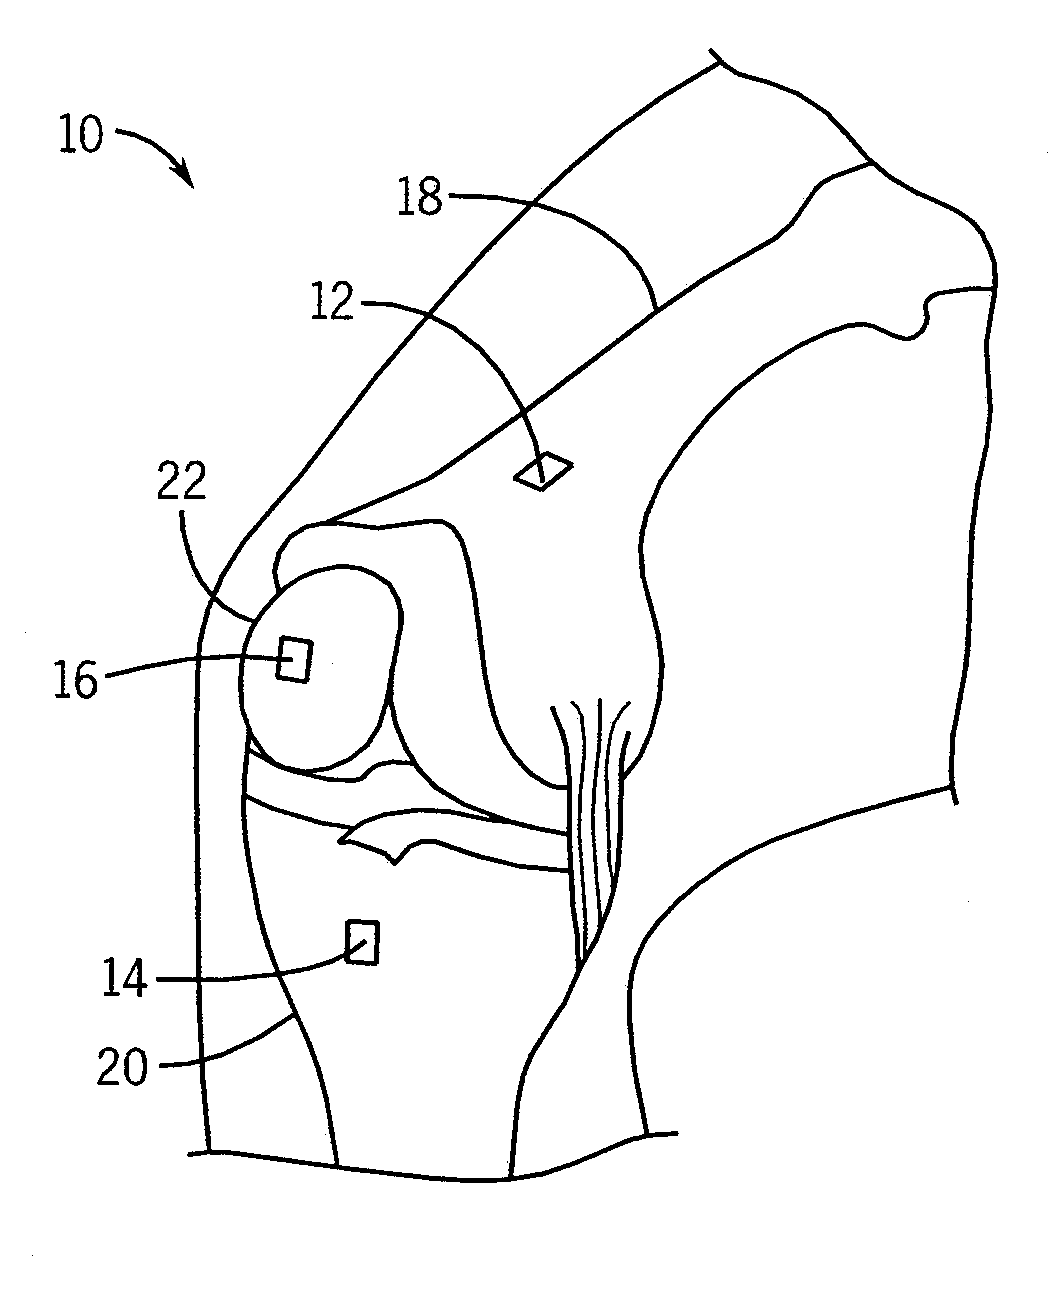 System and method for measurement of clinical parameters of the knee for use during knee replacement surgery